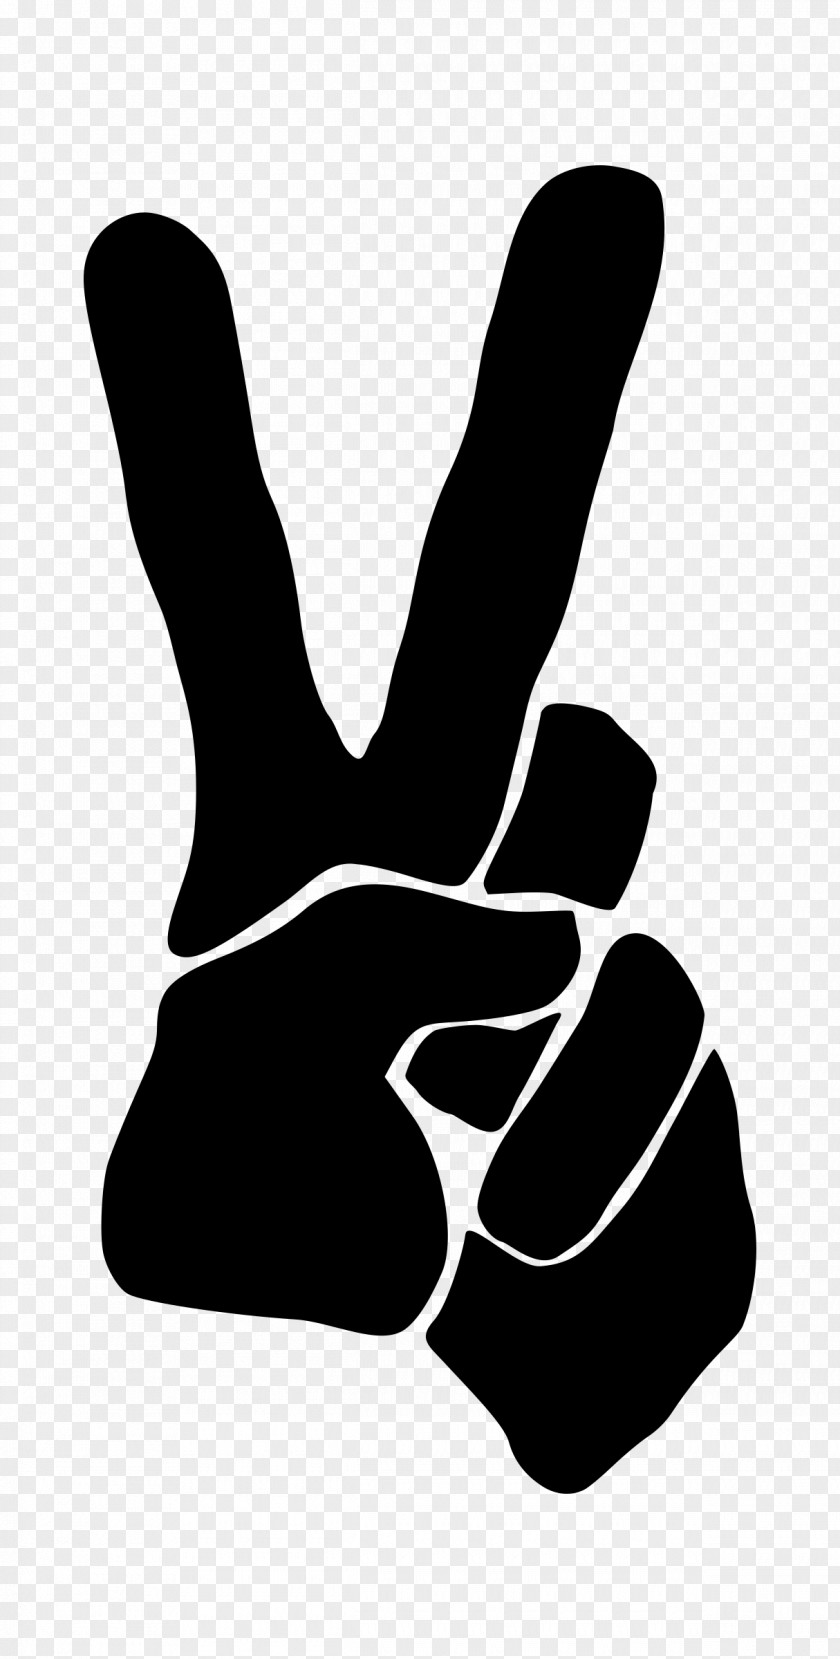 Victory Peace Symbols V Sign Silhouette Clip Art PNG